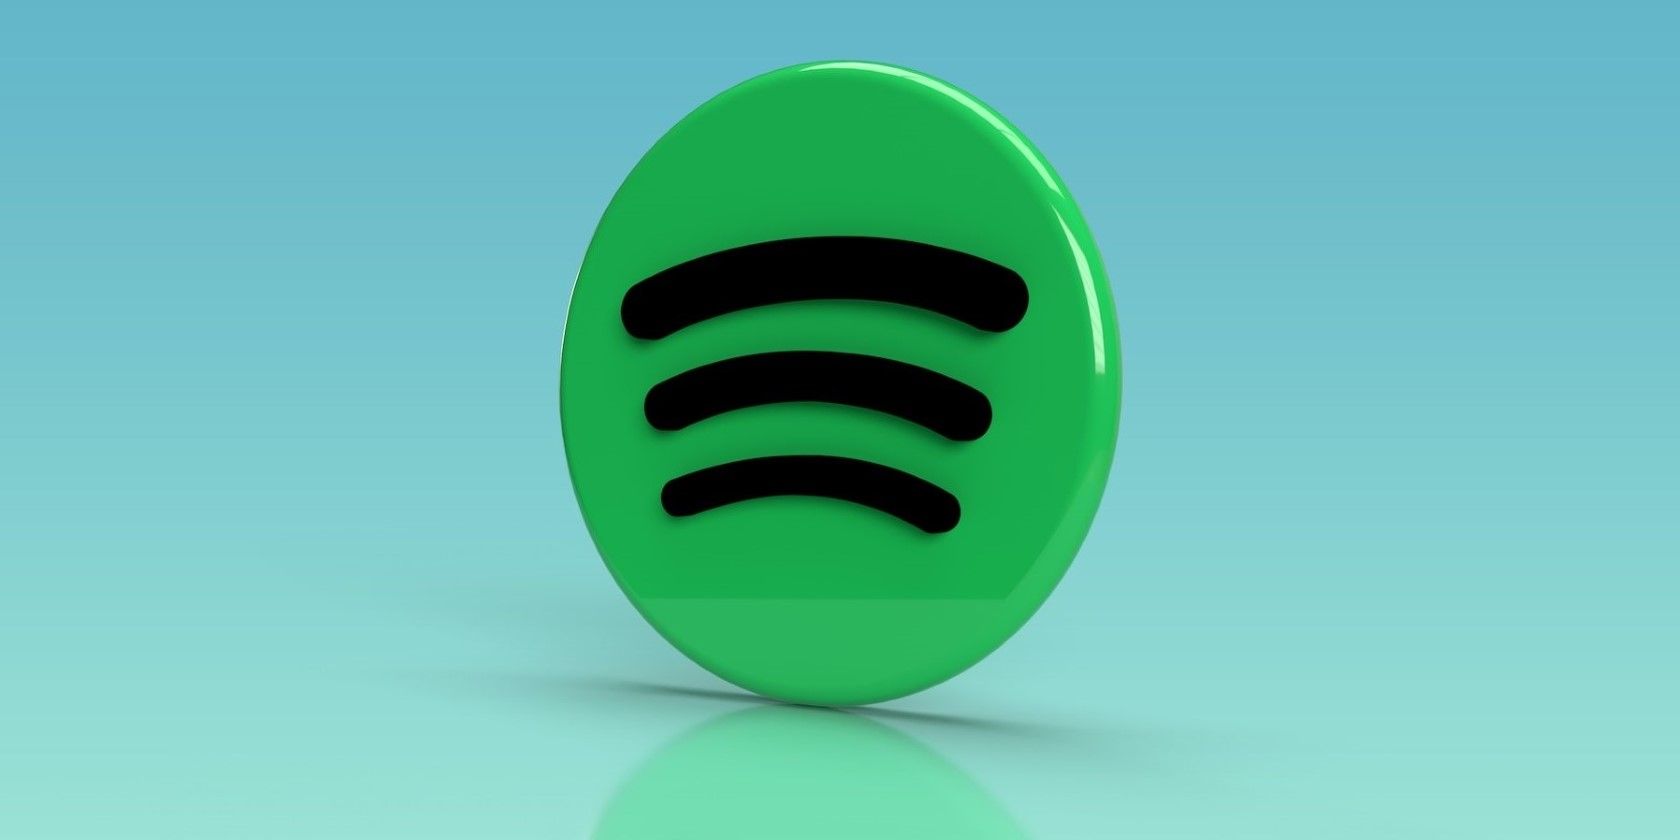 How to Stop Spotify From Starting Automatically on